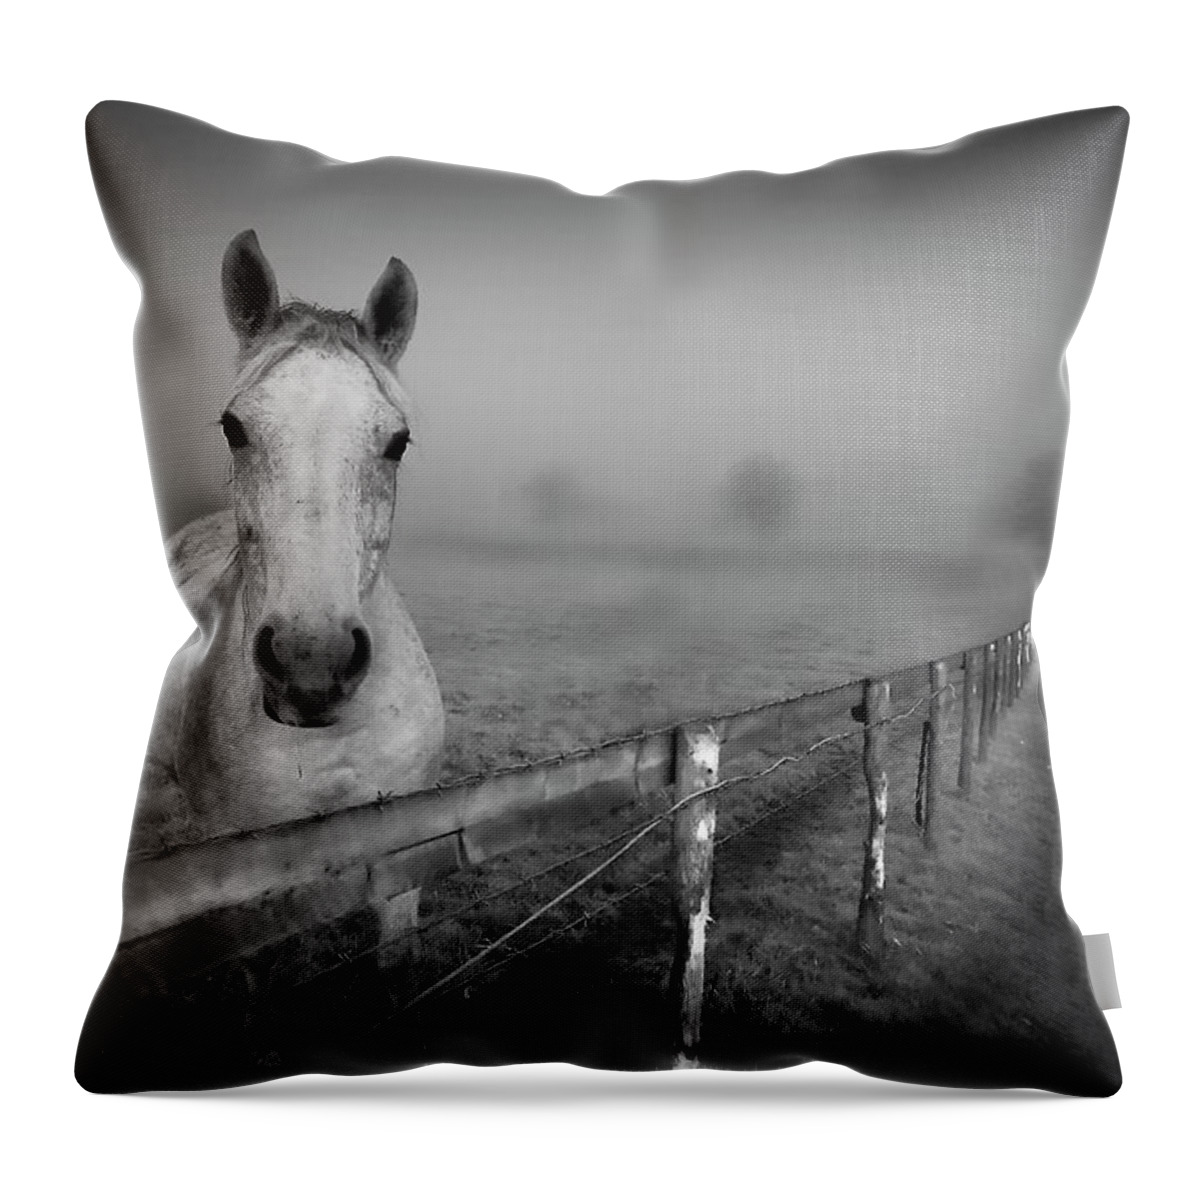 Horse Throw Pillow featuring the photograph Equine Fog by Taken With Passion